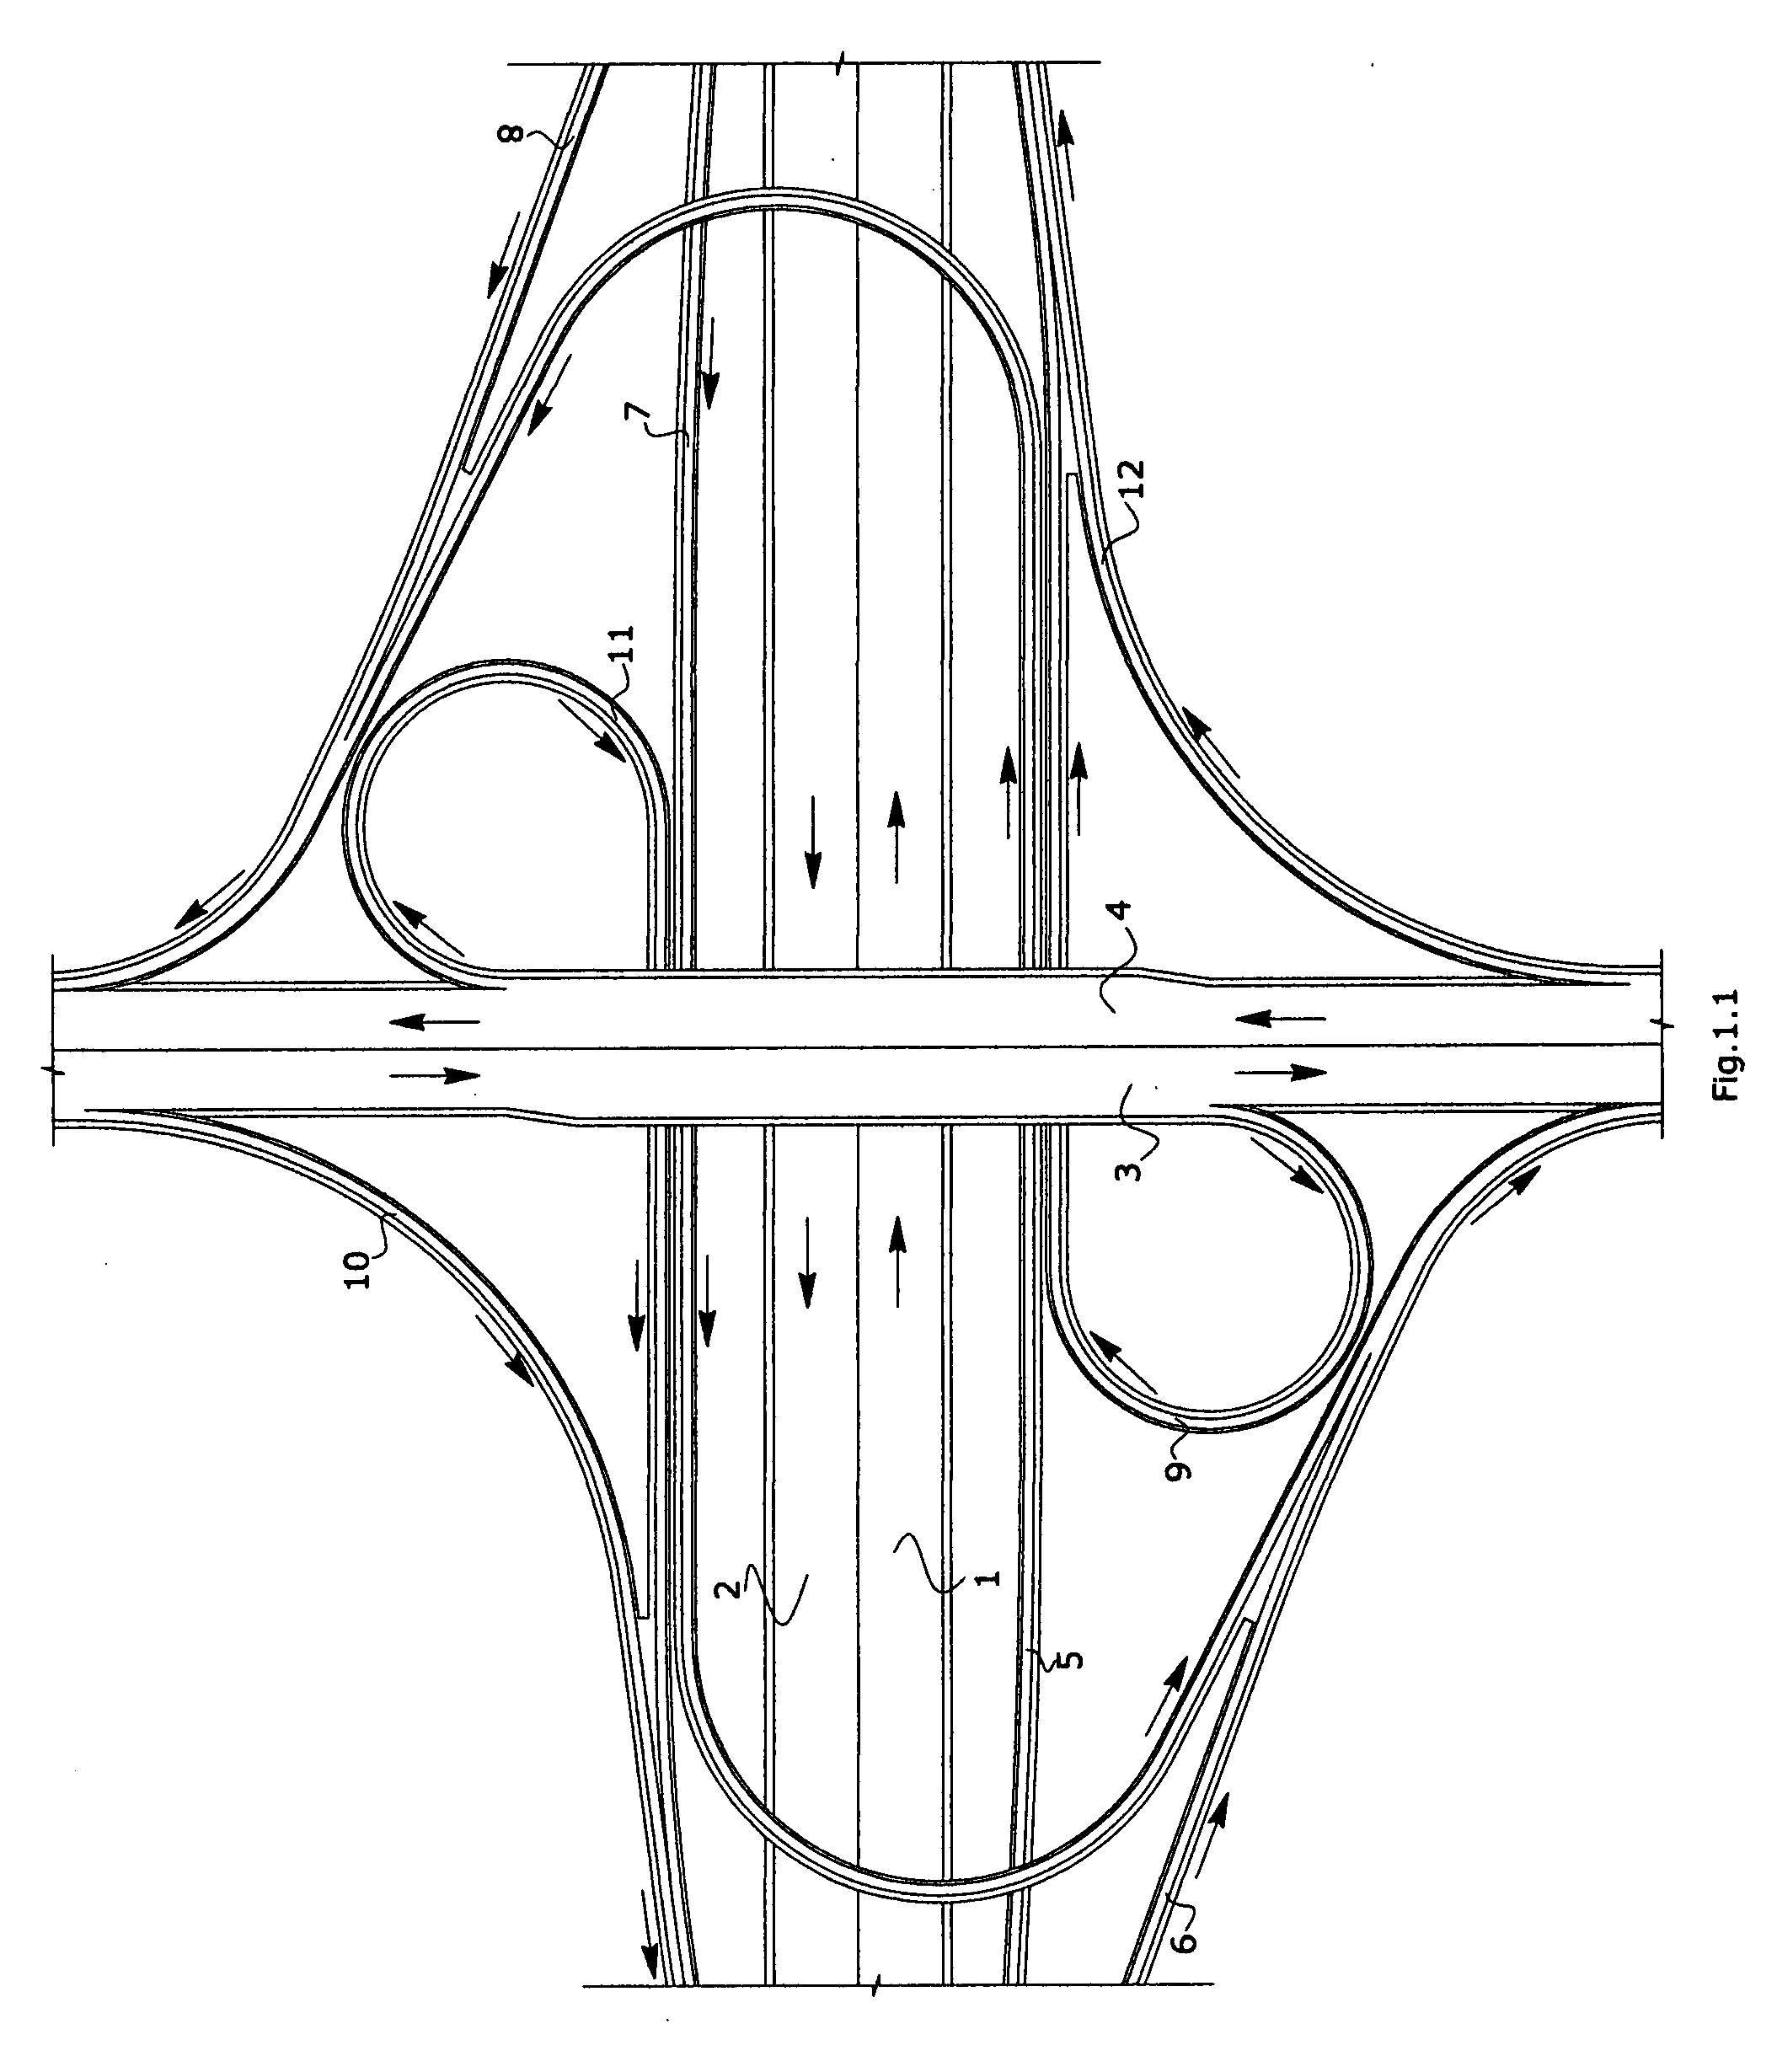 Weaving free two level cloverleaf type interchange for a highway crossing under a street